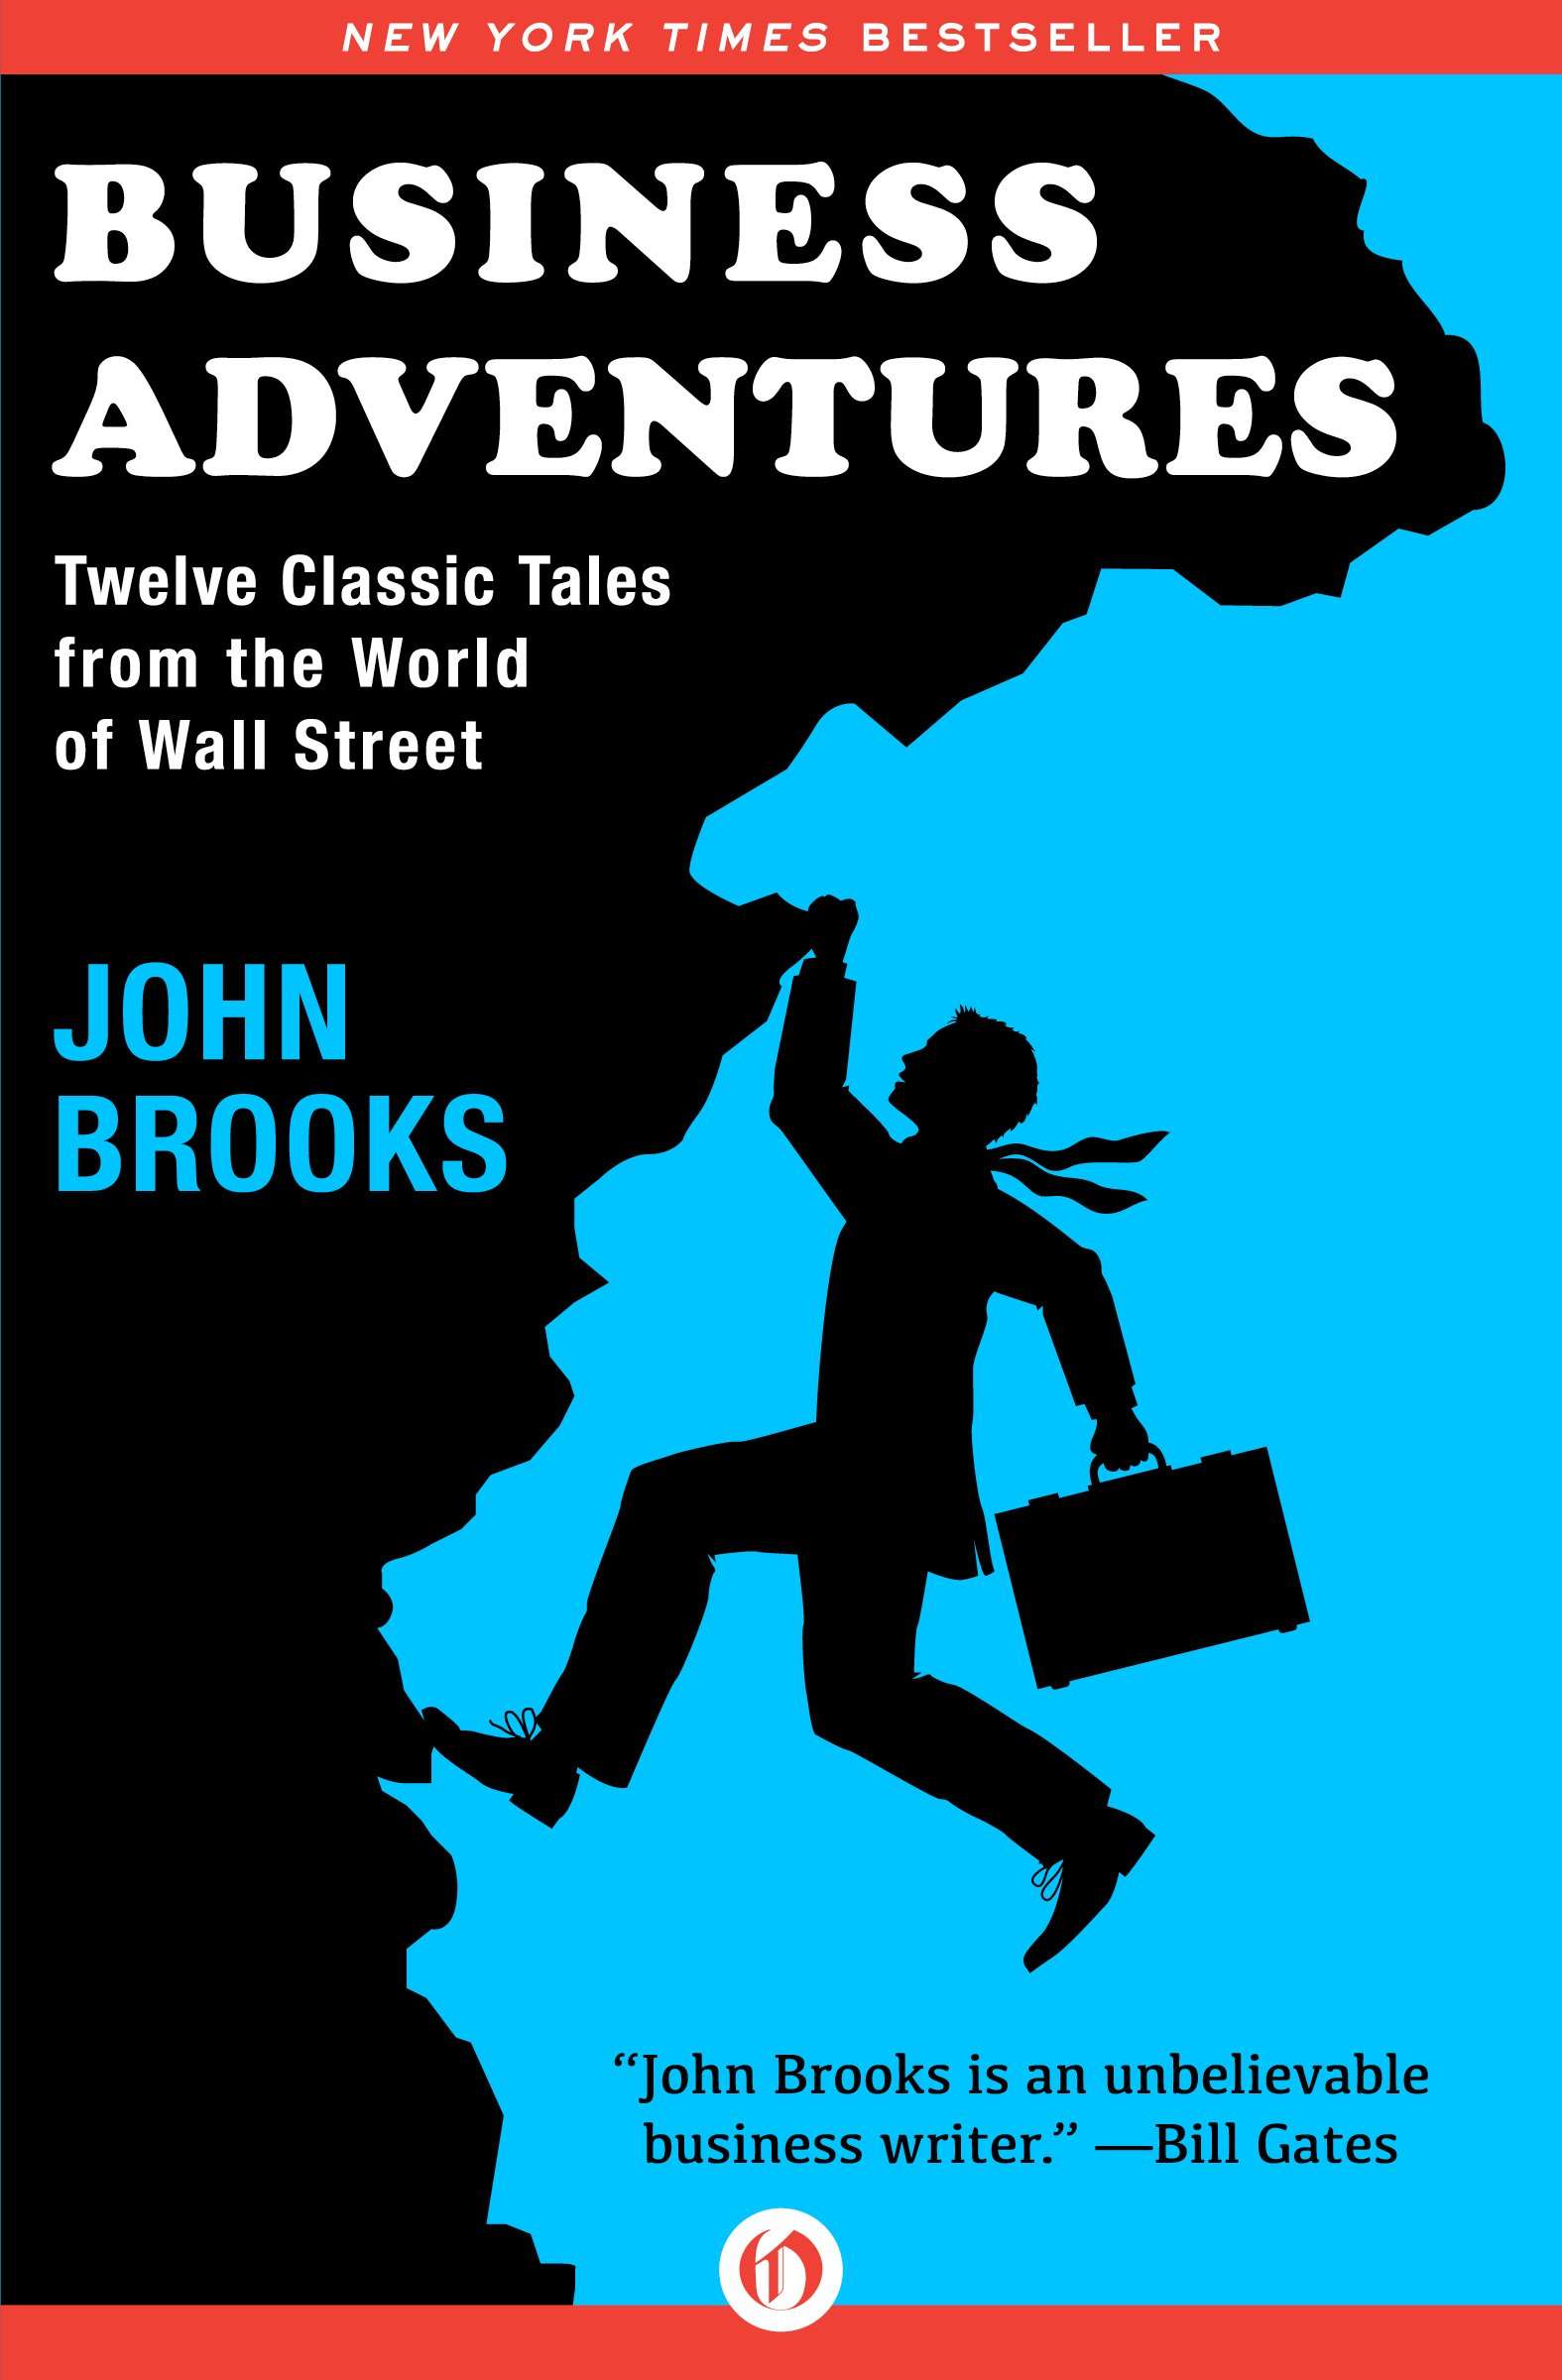 'Business Adventures: Twelve Classic Tales from the World of Wall